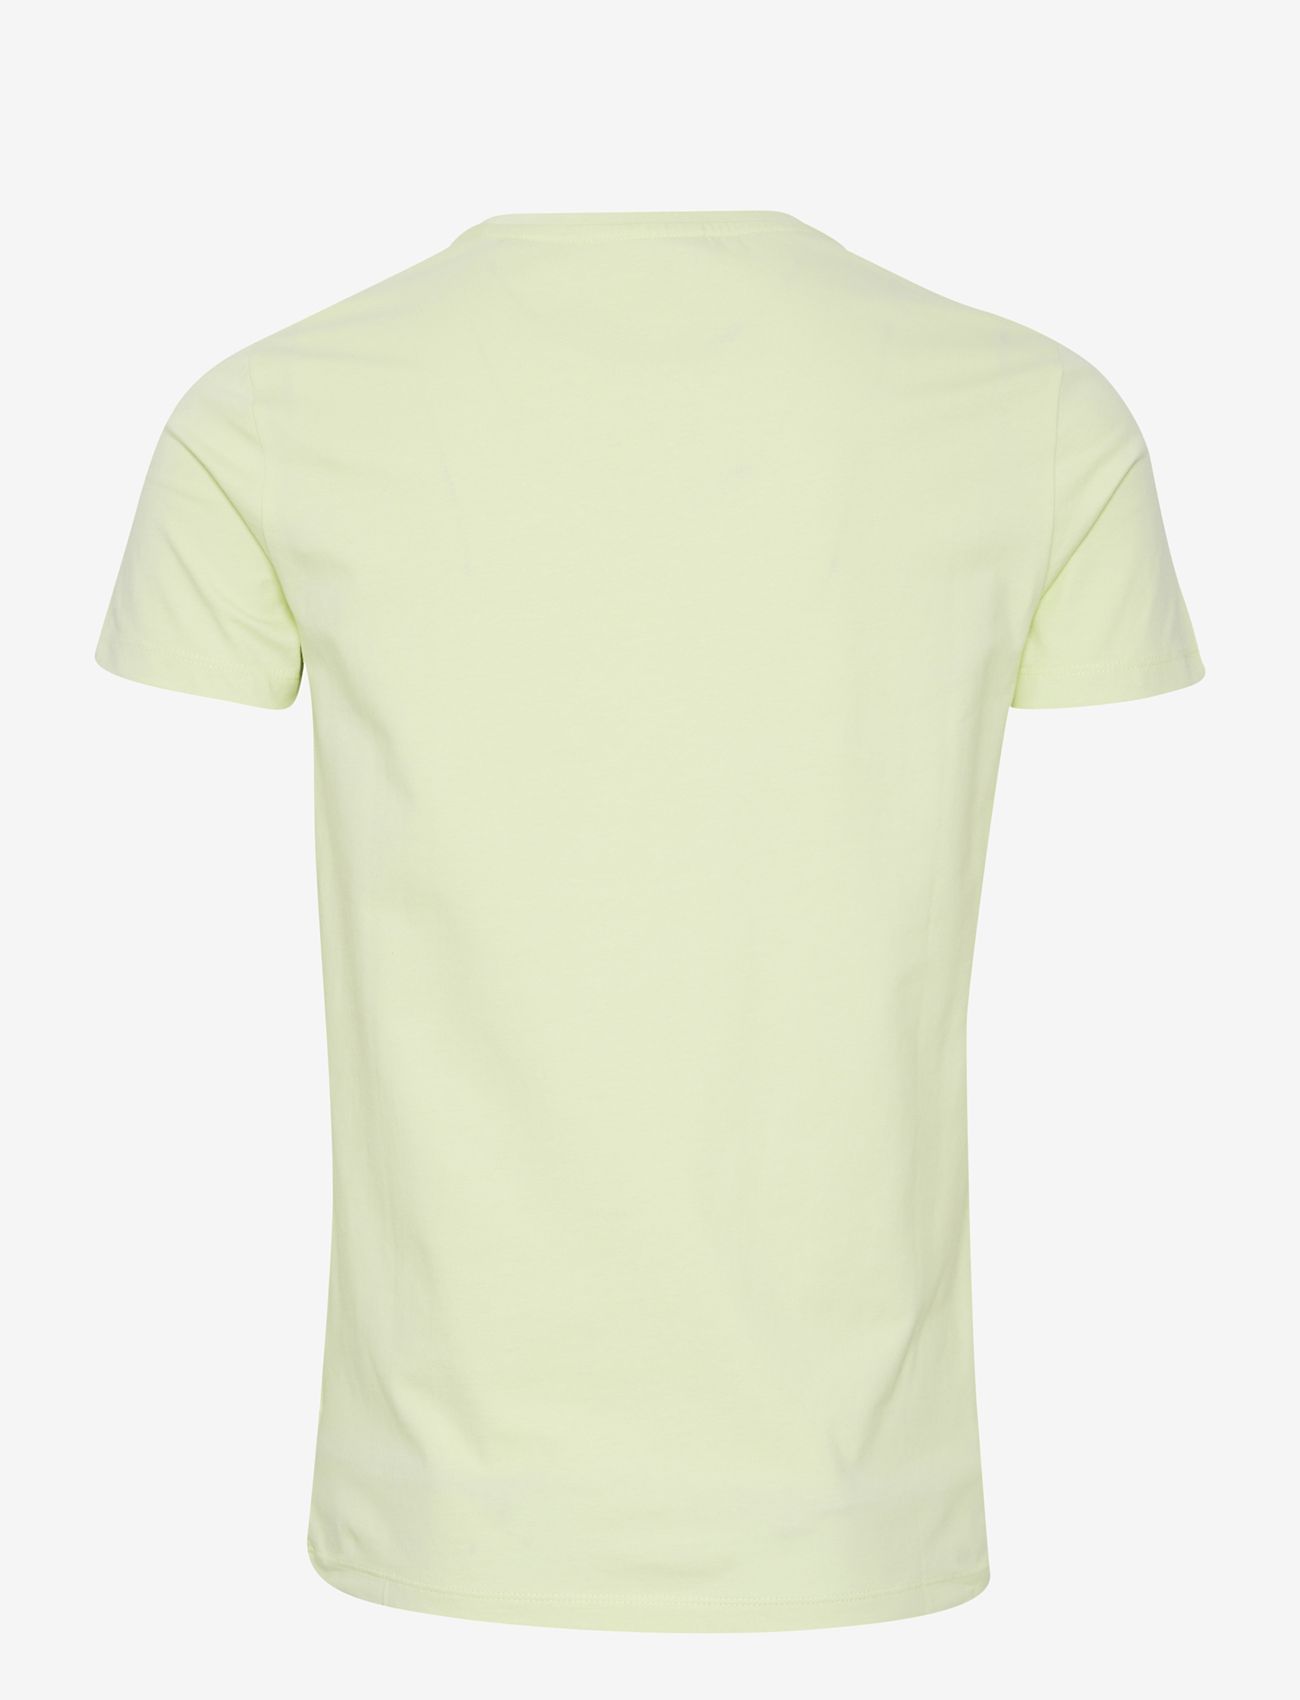 Casual Friday - CFDAVIDE crew neck tee - lowest prices - seafoam green - 1